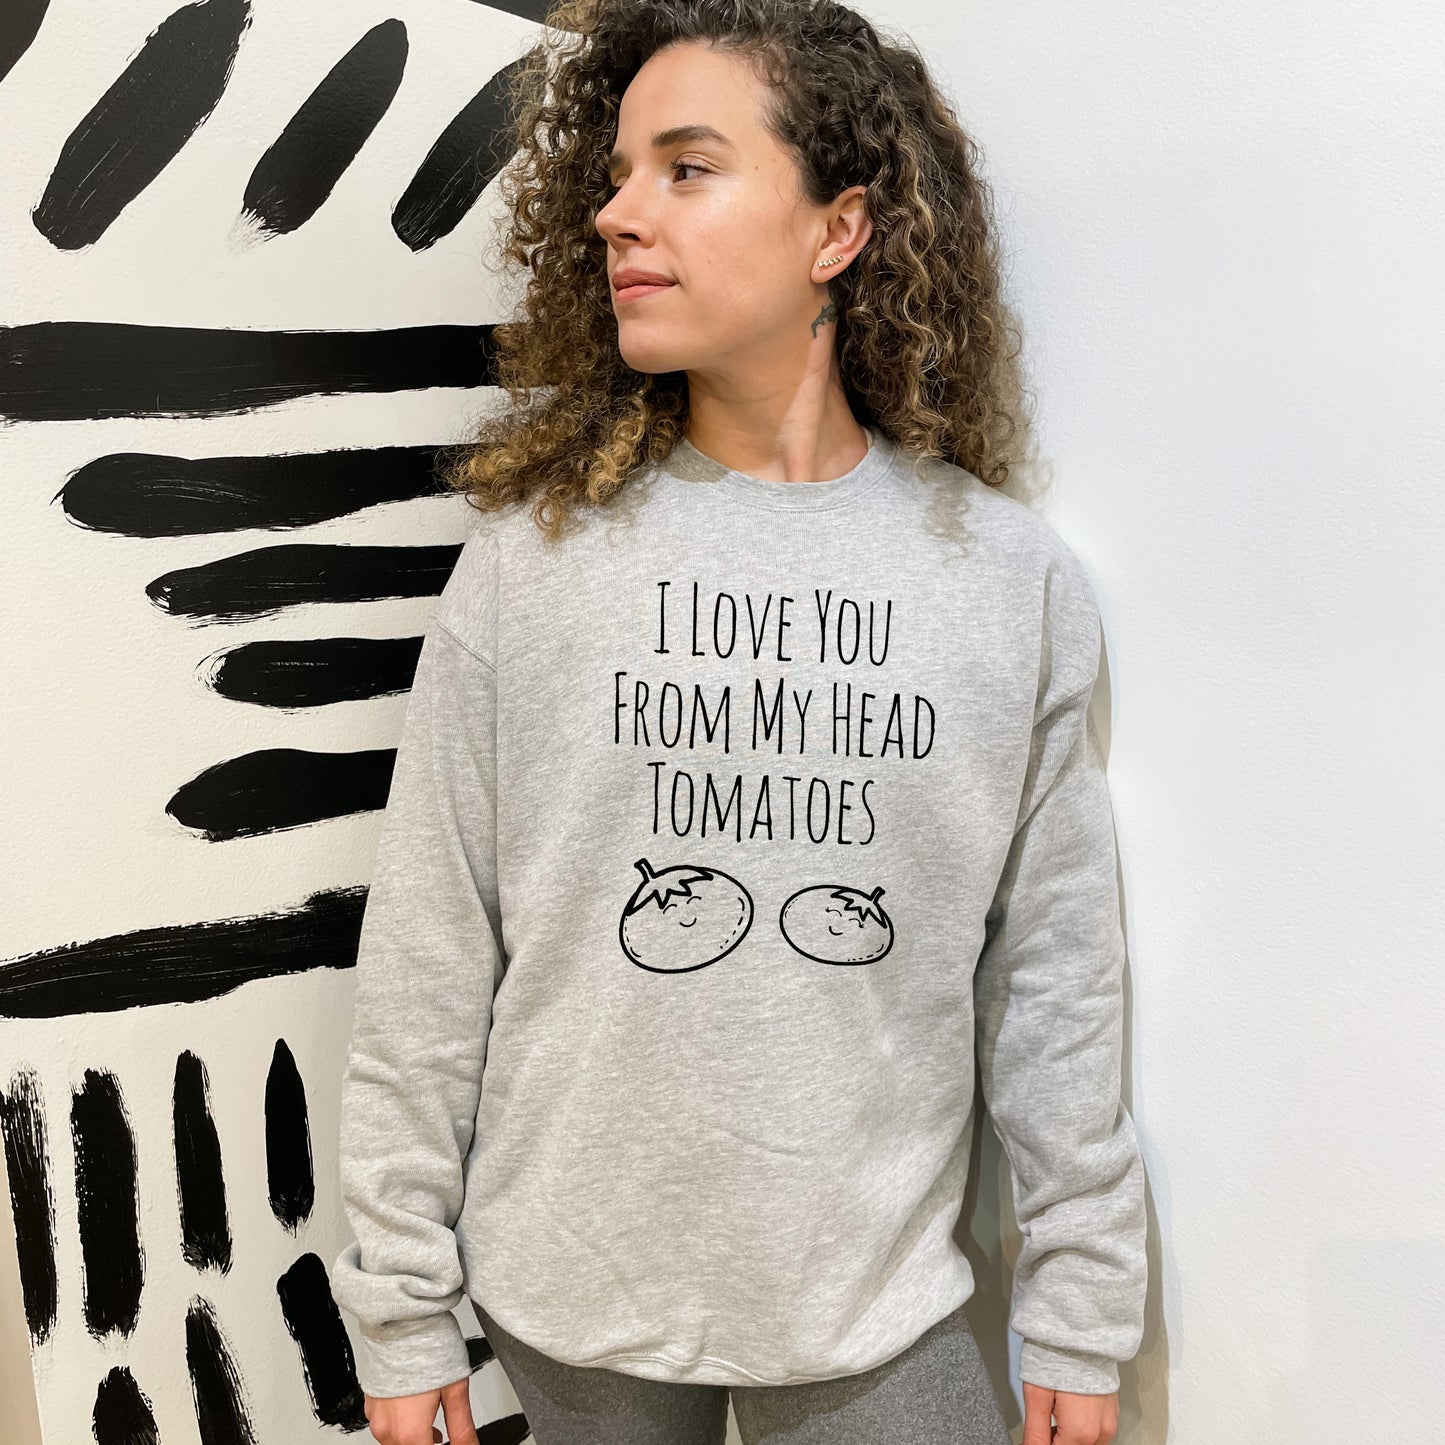 I Love You From My Head Tomatoes - Unisex Sweatshirt - Heather Gray or Dusty Blue